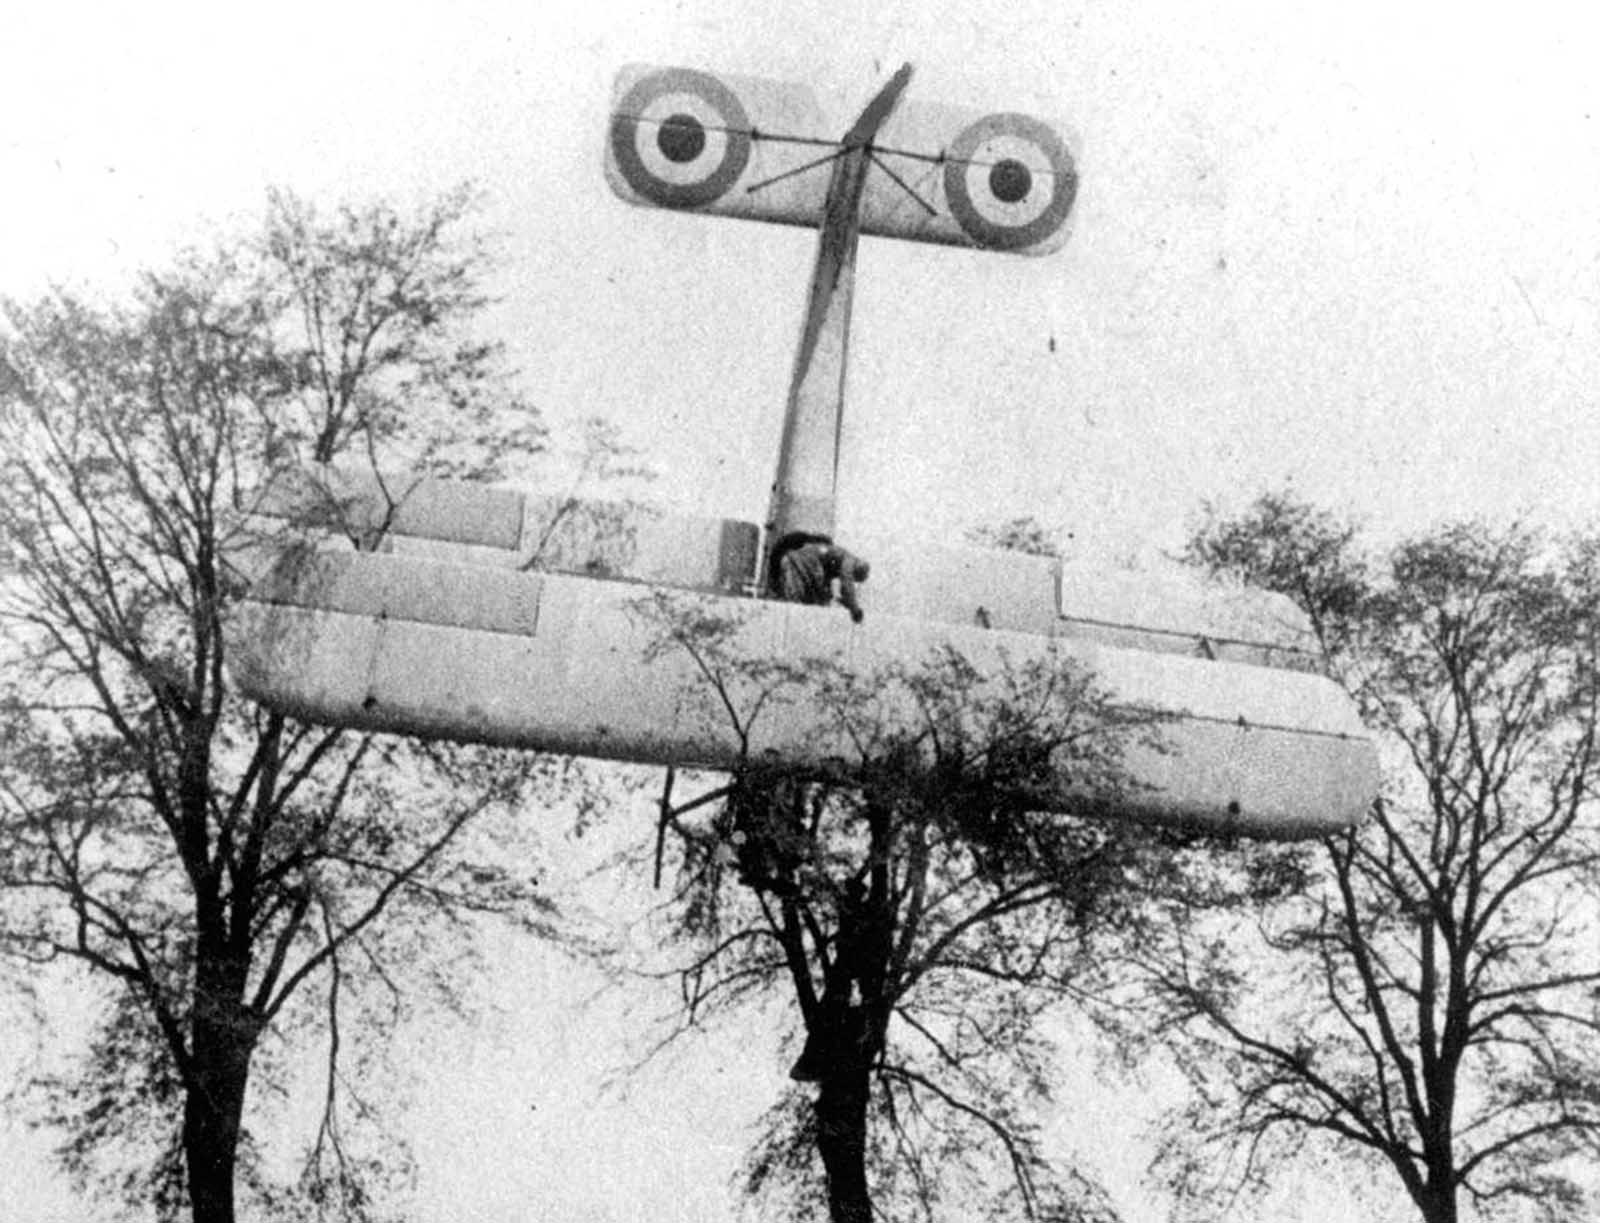 A French pilot made an emergency landing in friendly territory after a failed attempt to attack a German Zeppelin hangar near Brussels, Belgium, in 1915. Soldiers are climbing up the tree where the biplane has landed.